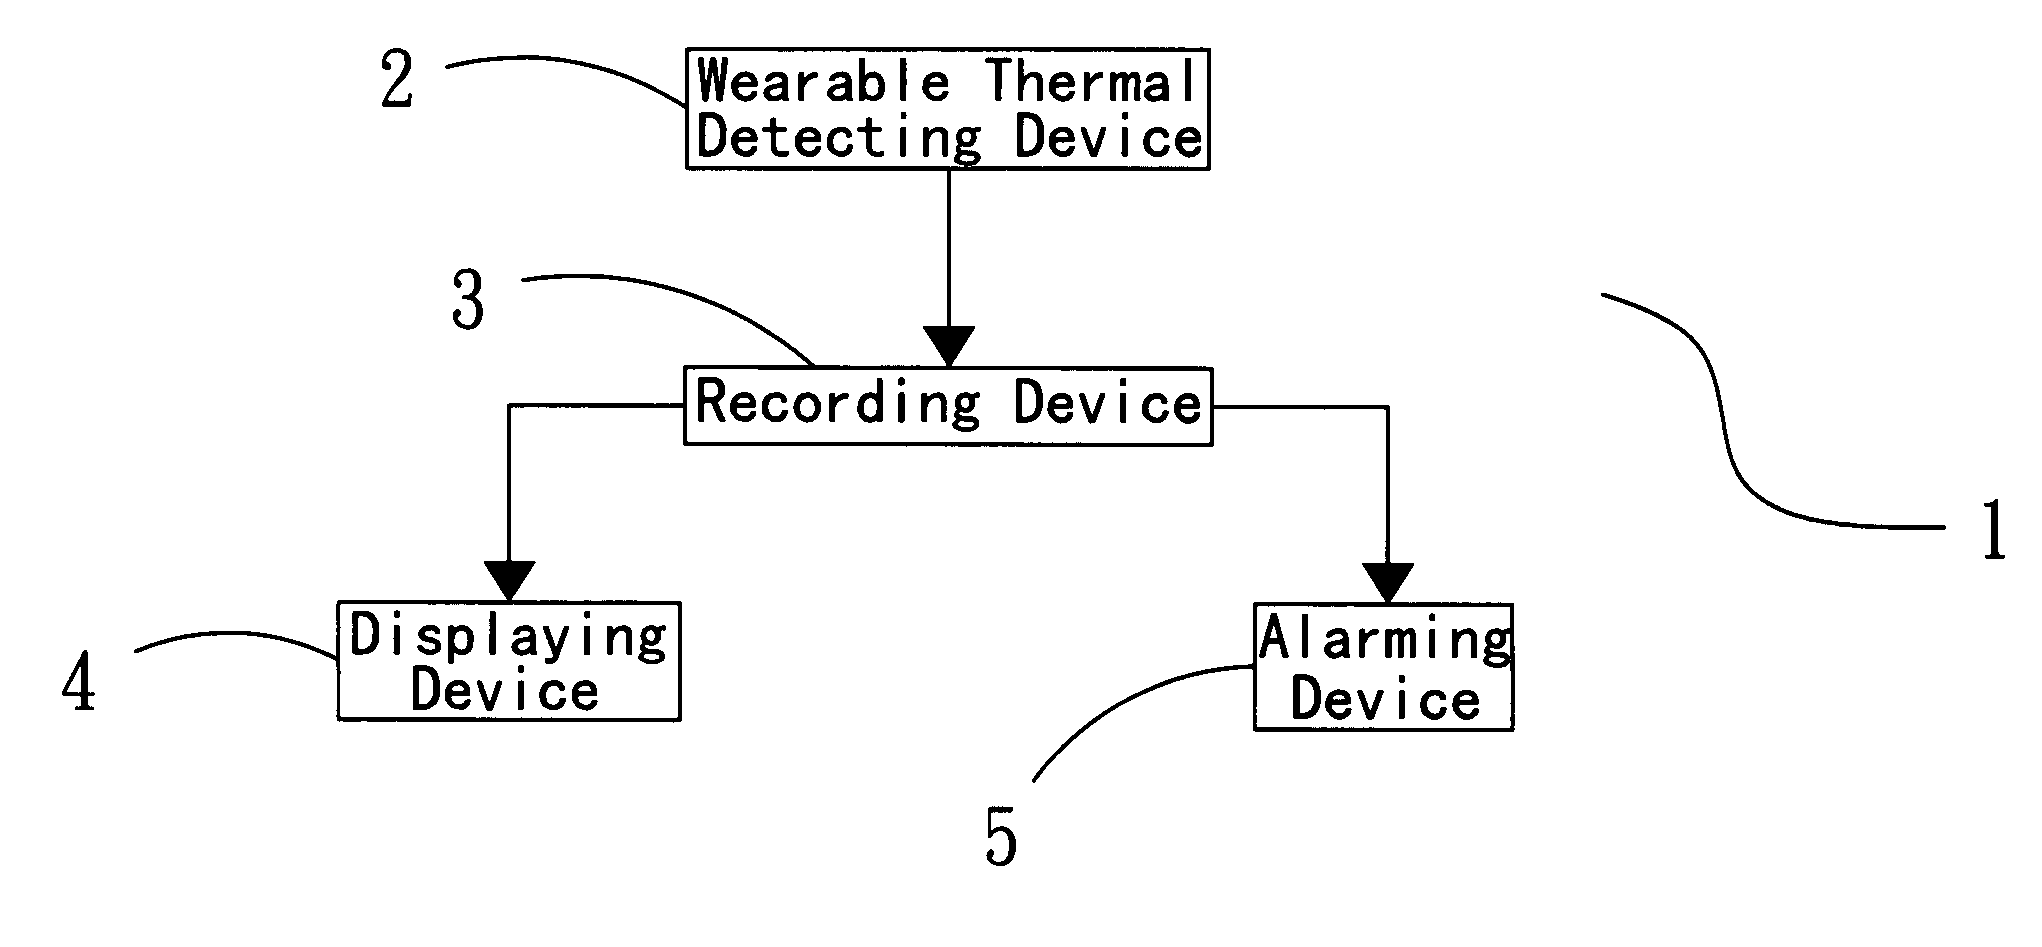 Portable body temperature continuous monitoring system